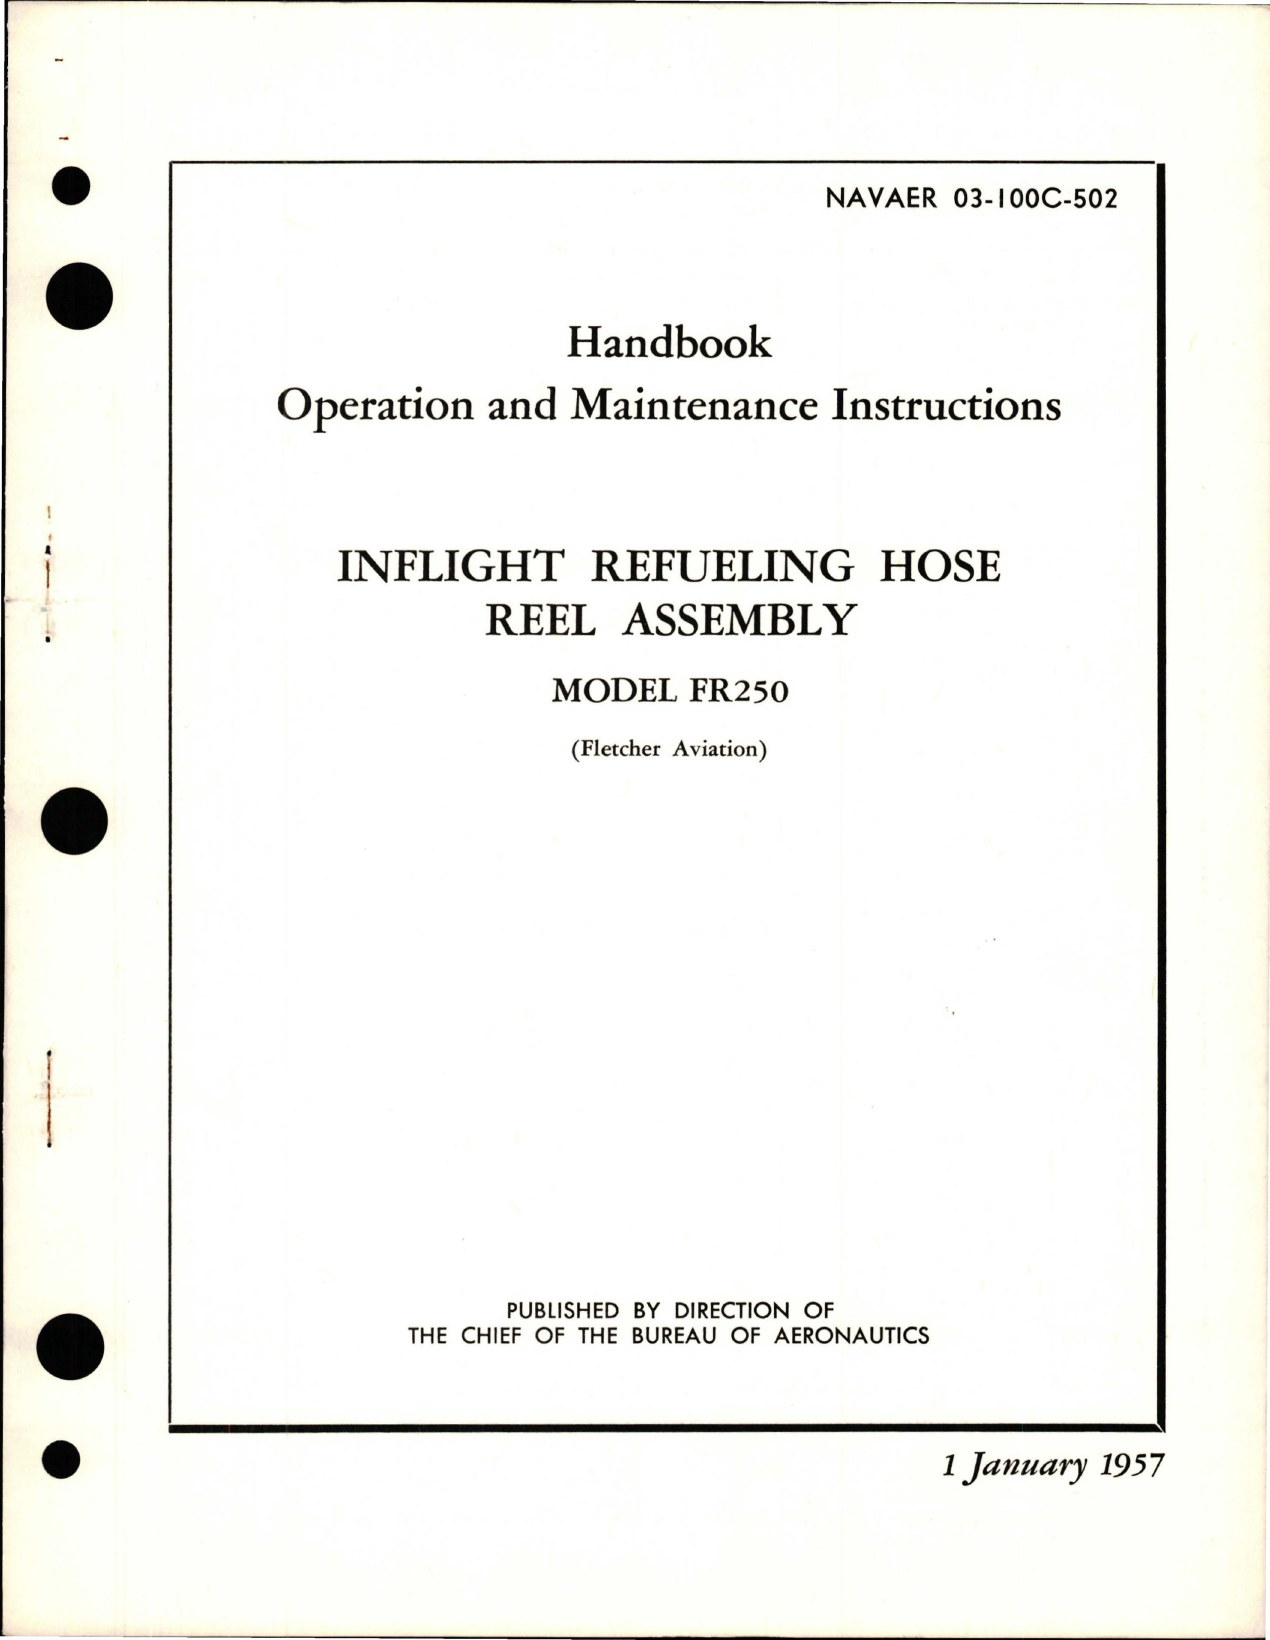 Sample page 1 from AirCorps Library document: Operation and Maintenance Instructions for Inflight Refueling Hose Reel Assembly - Model FR250 